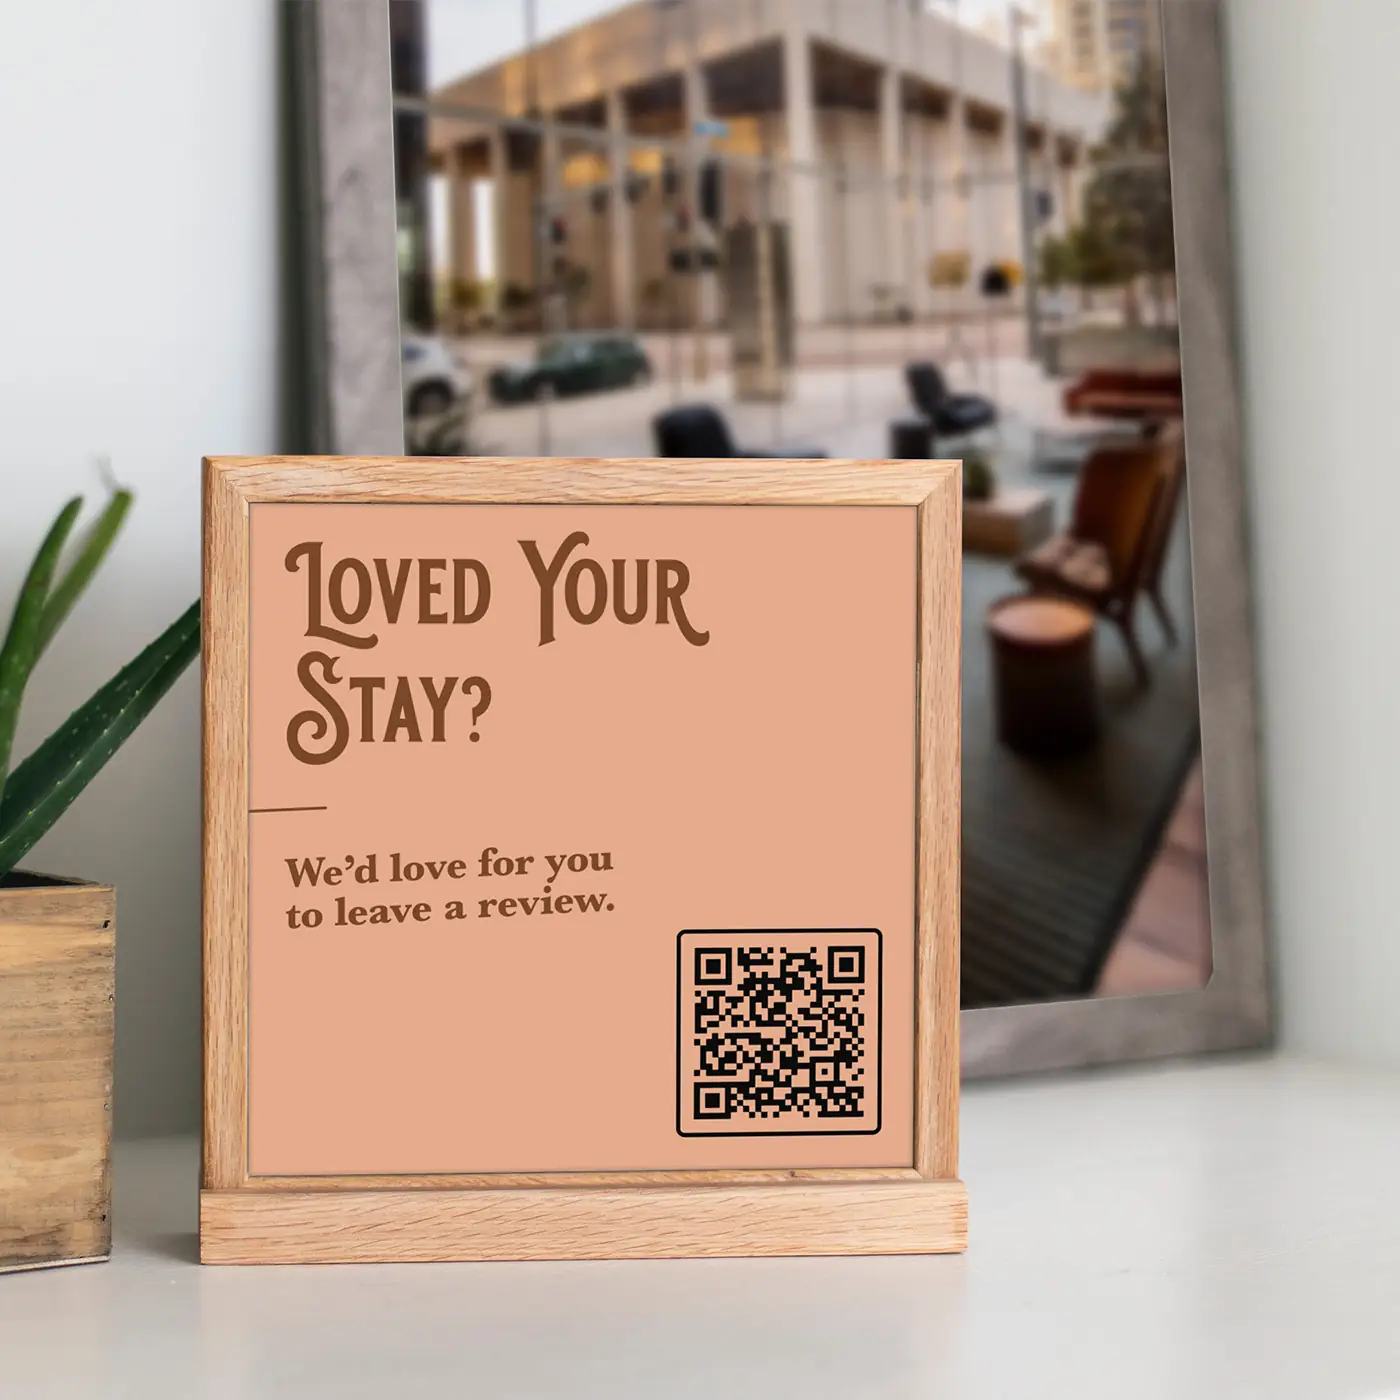 Table sign with QR code